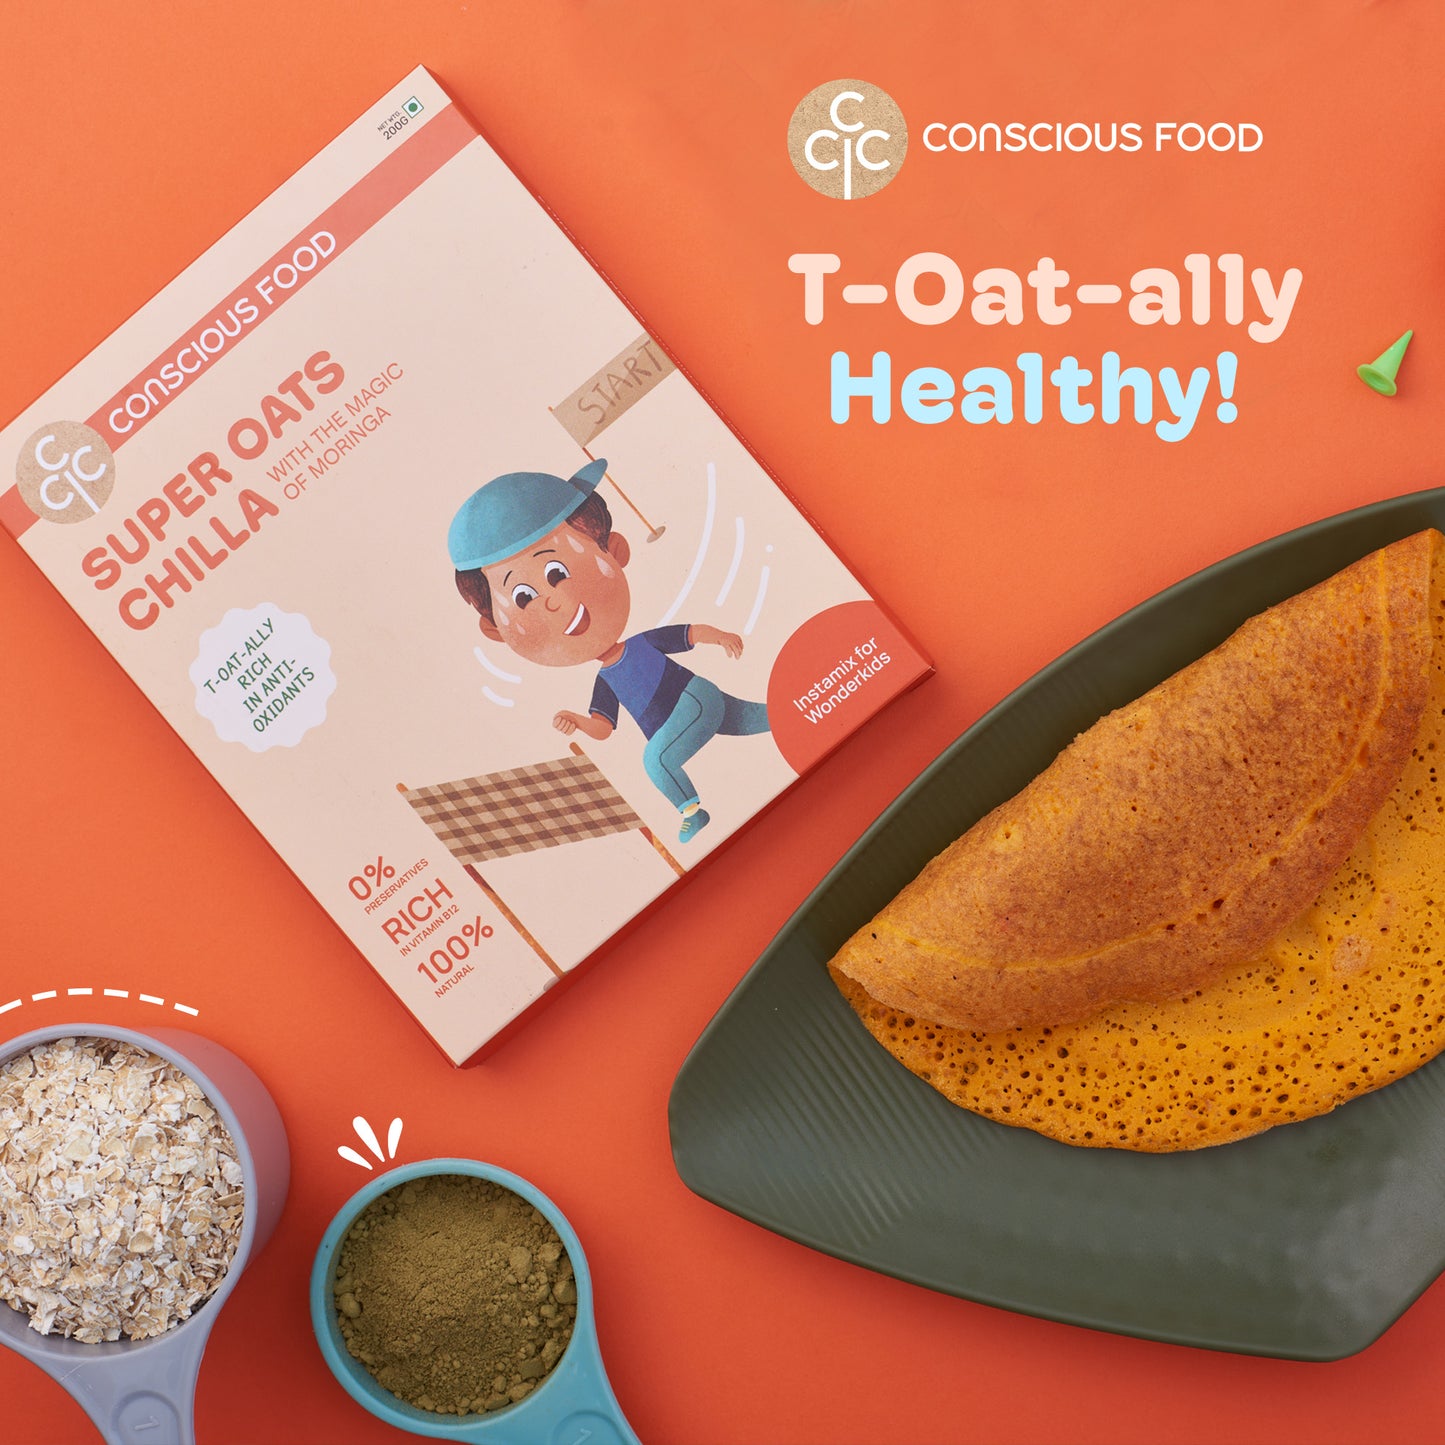 
                  
                    Conscious Food For Kids Super Oats Chilla Mix With the Magic of Moringa (200g)
                  
                